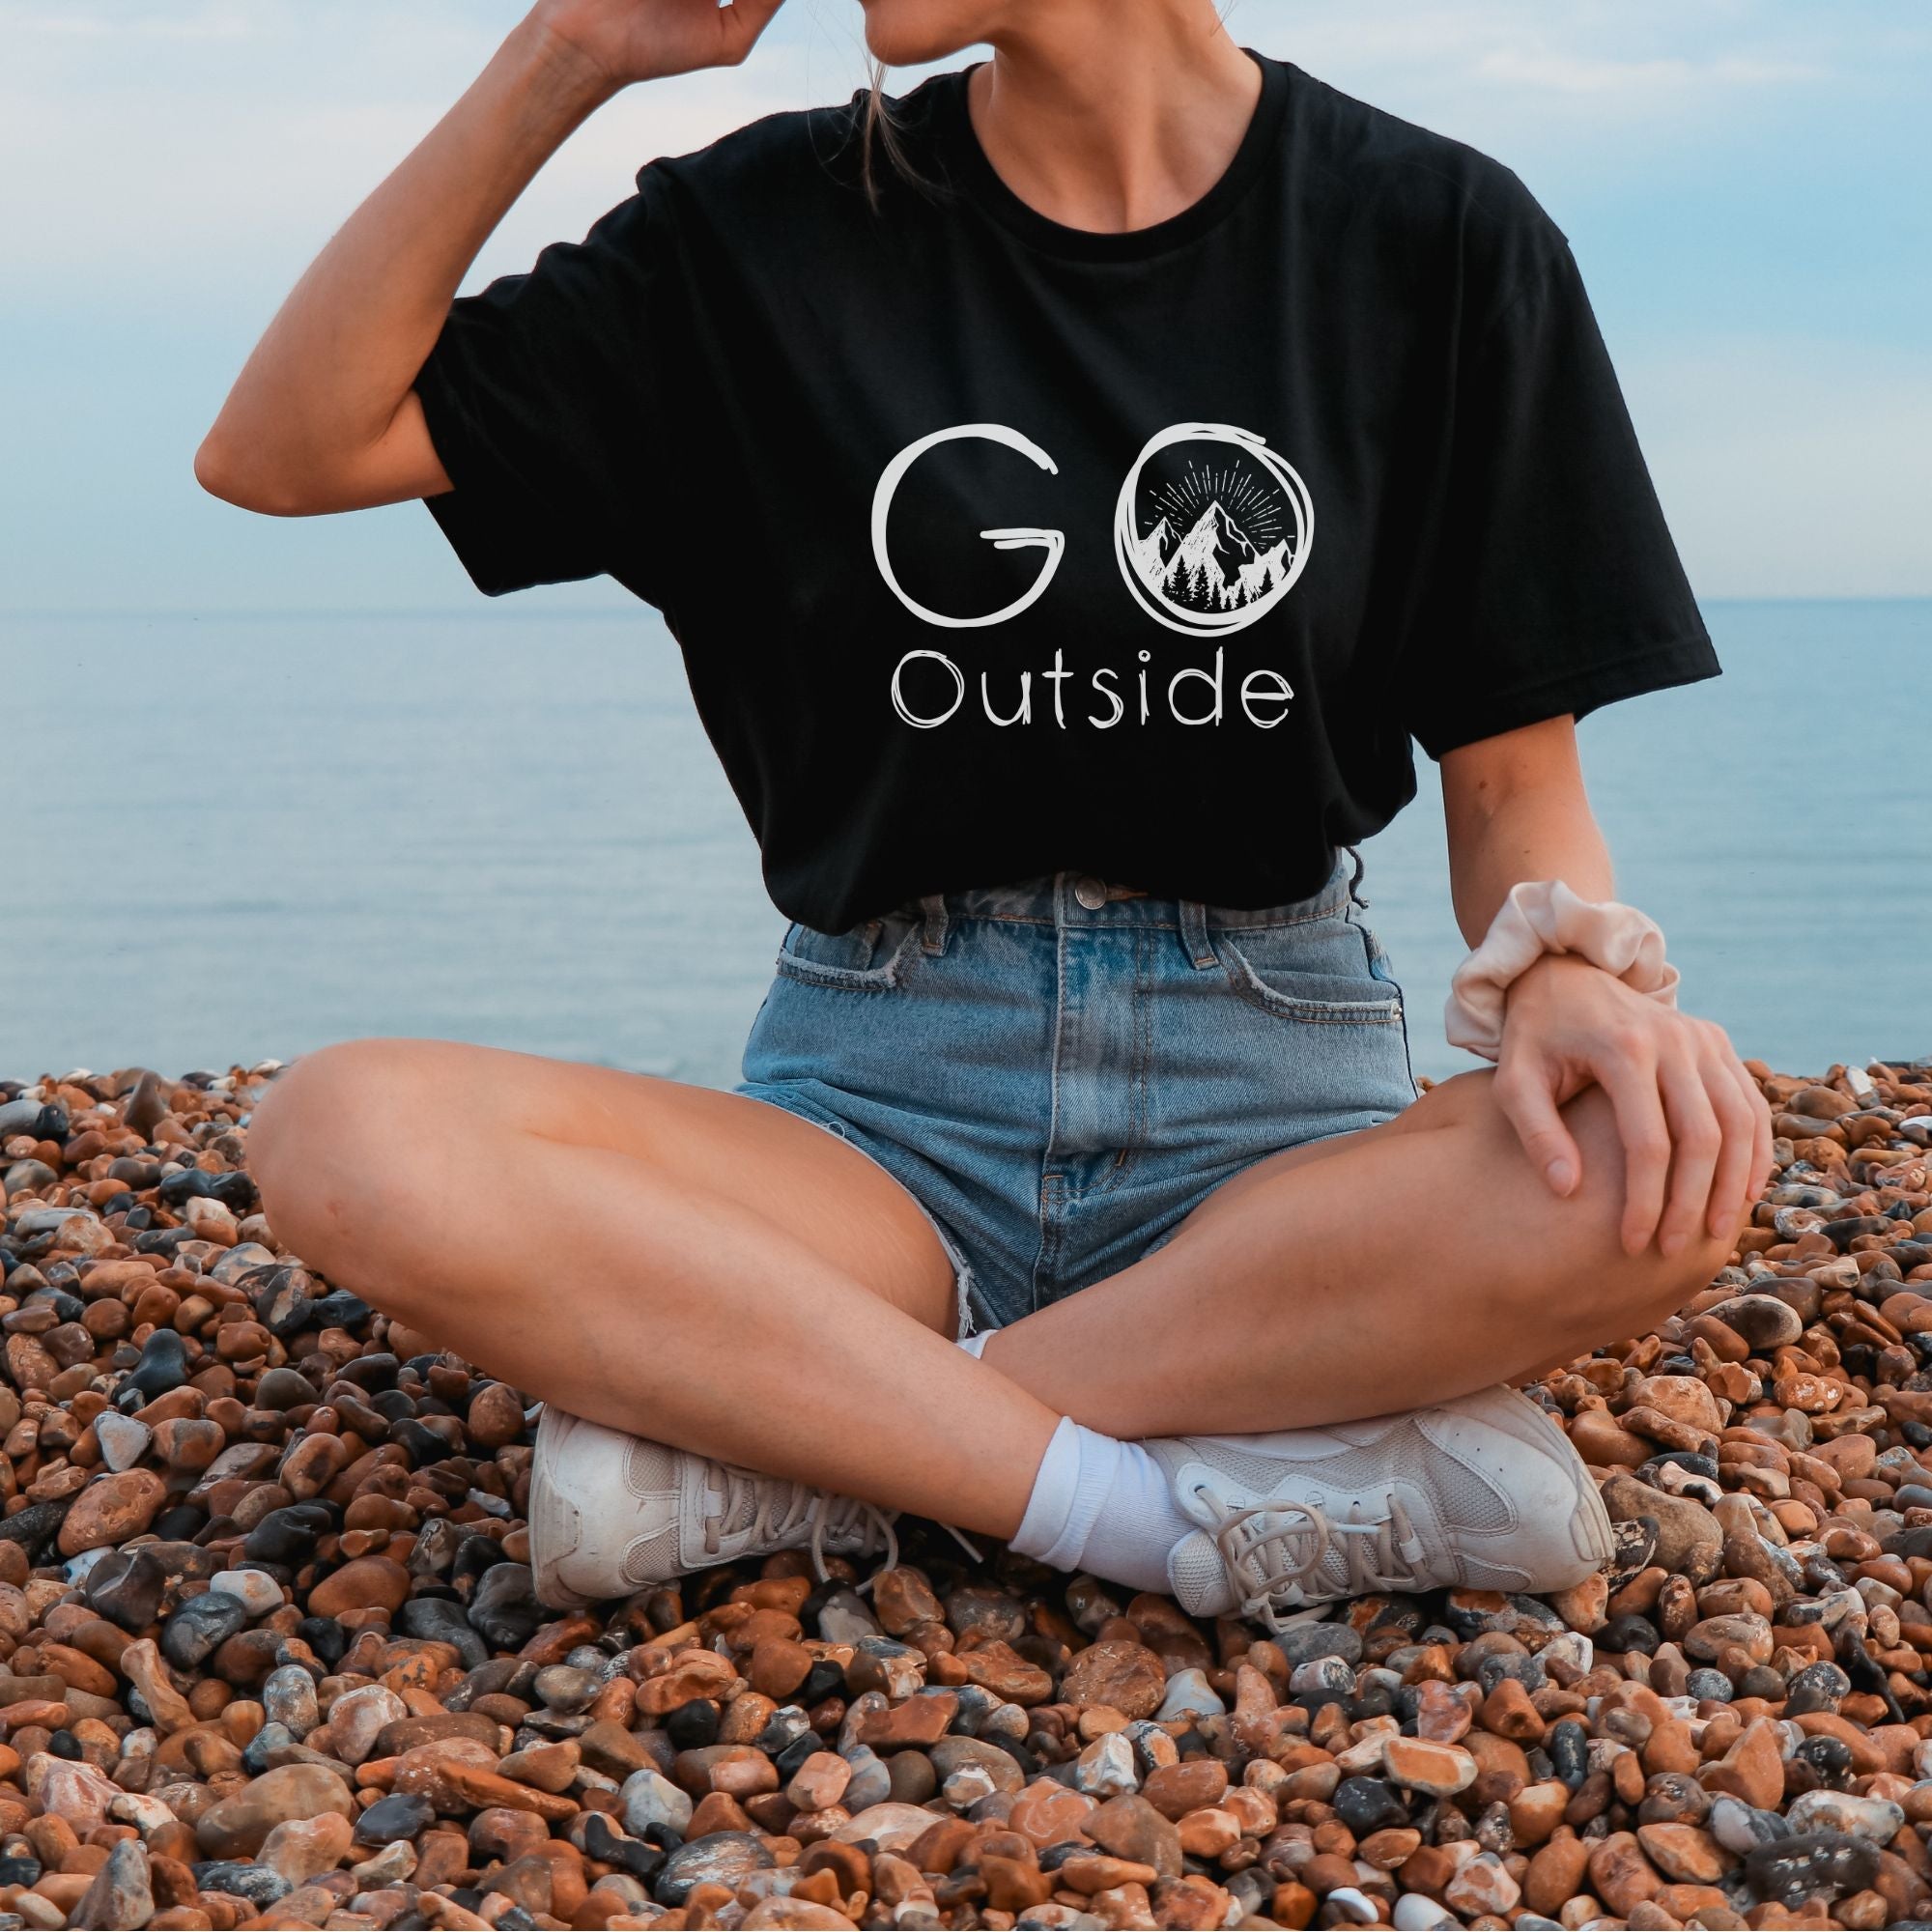 Go Outside Graphic Tee for Hiker *UNISEX FIT*-208 Tees Wholesale, Idaho